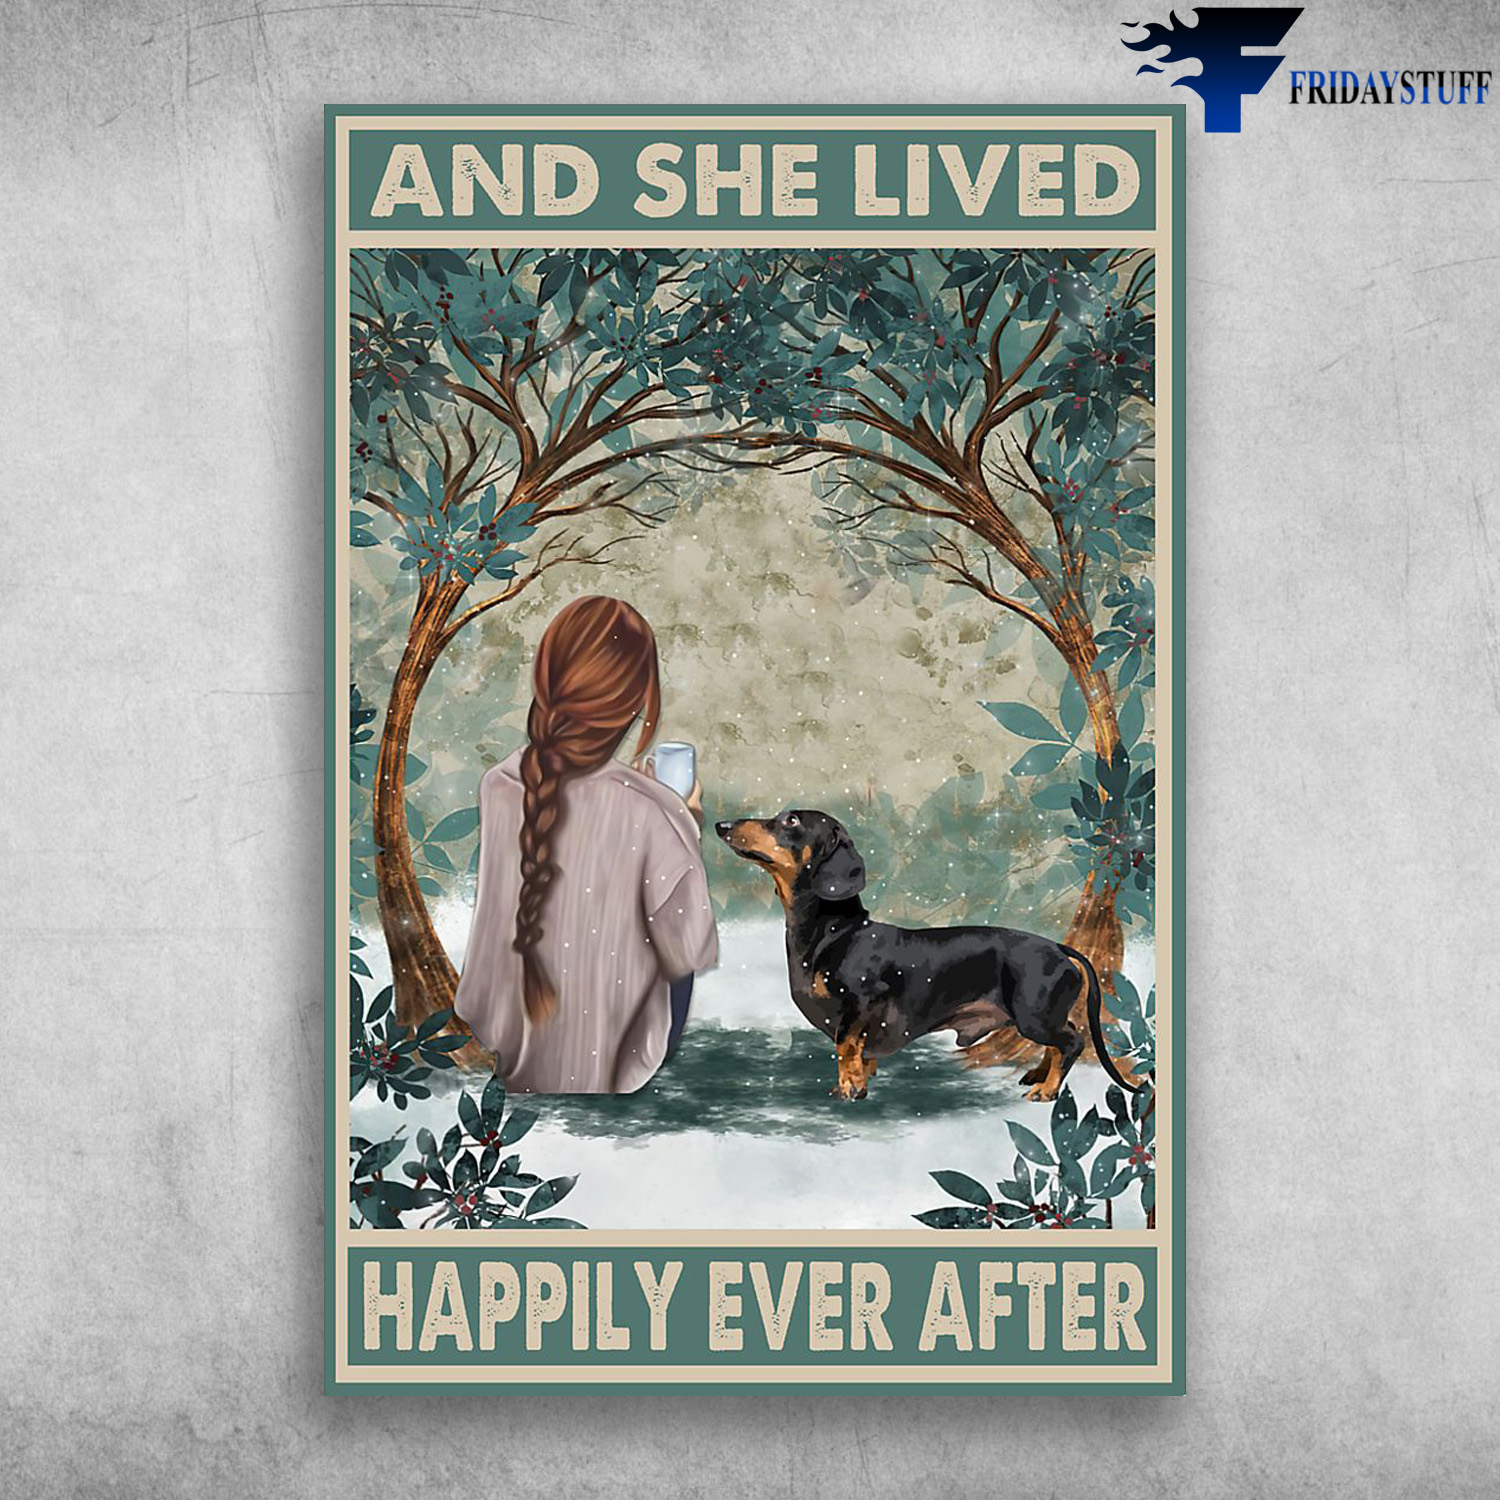 Girl And Dachshund Dog - And She Live, Happily Ever After